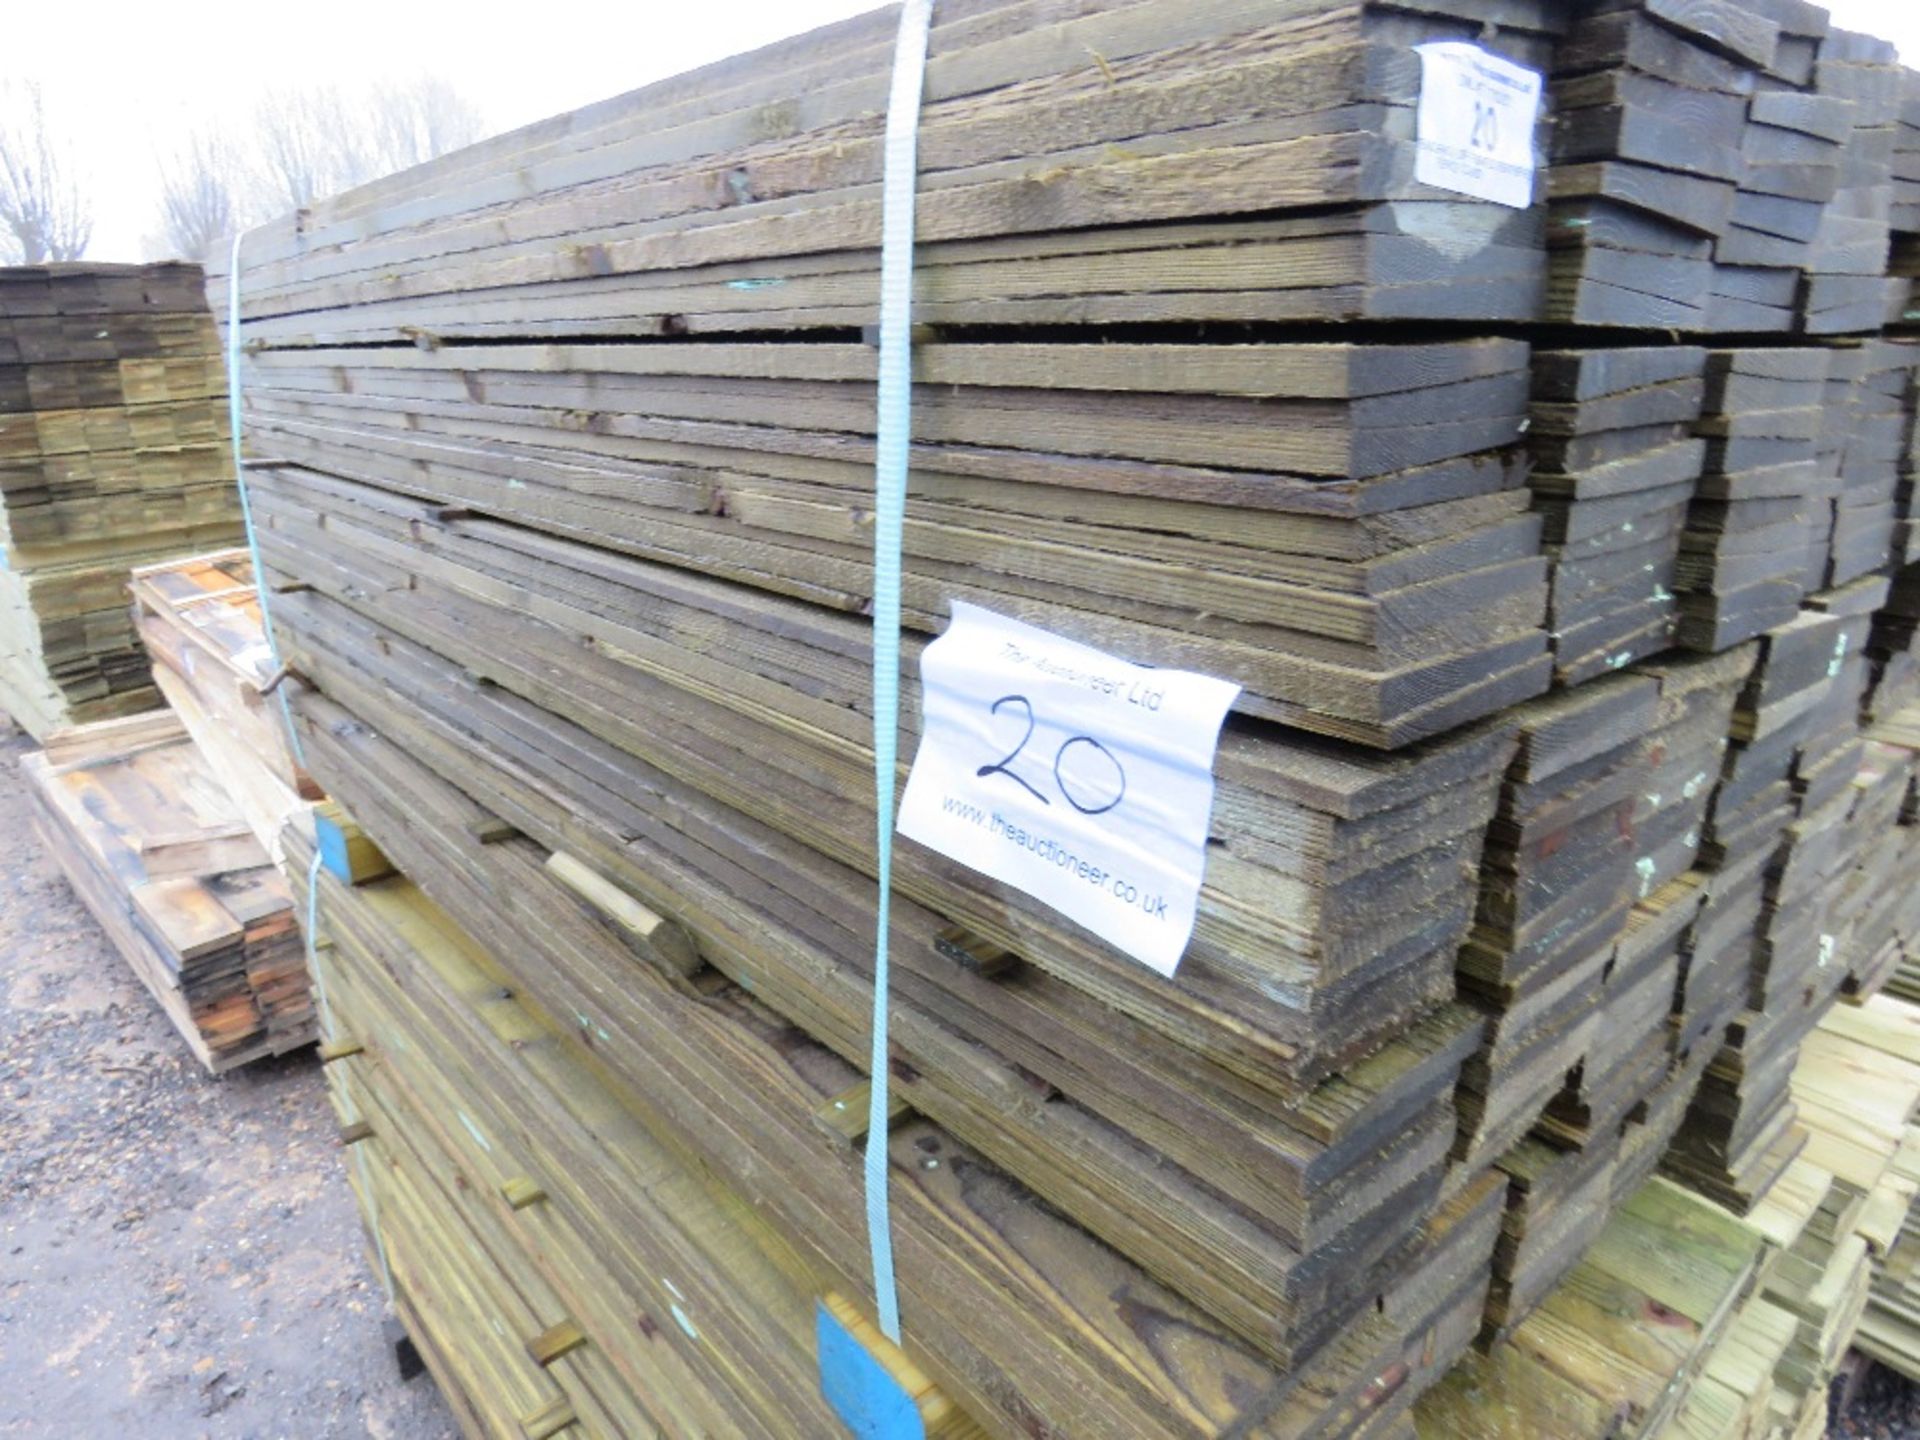 PACK OF TREATED FEATHER EDGE FENCE CLADDING BOARDS. 1.5M X 10CM APPROX. - Image 3 of 5